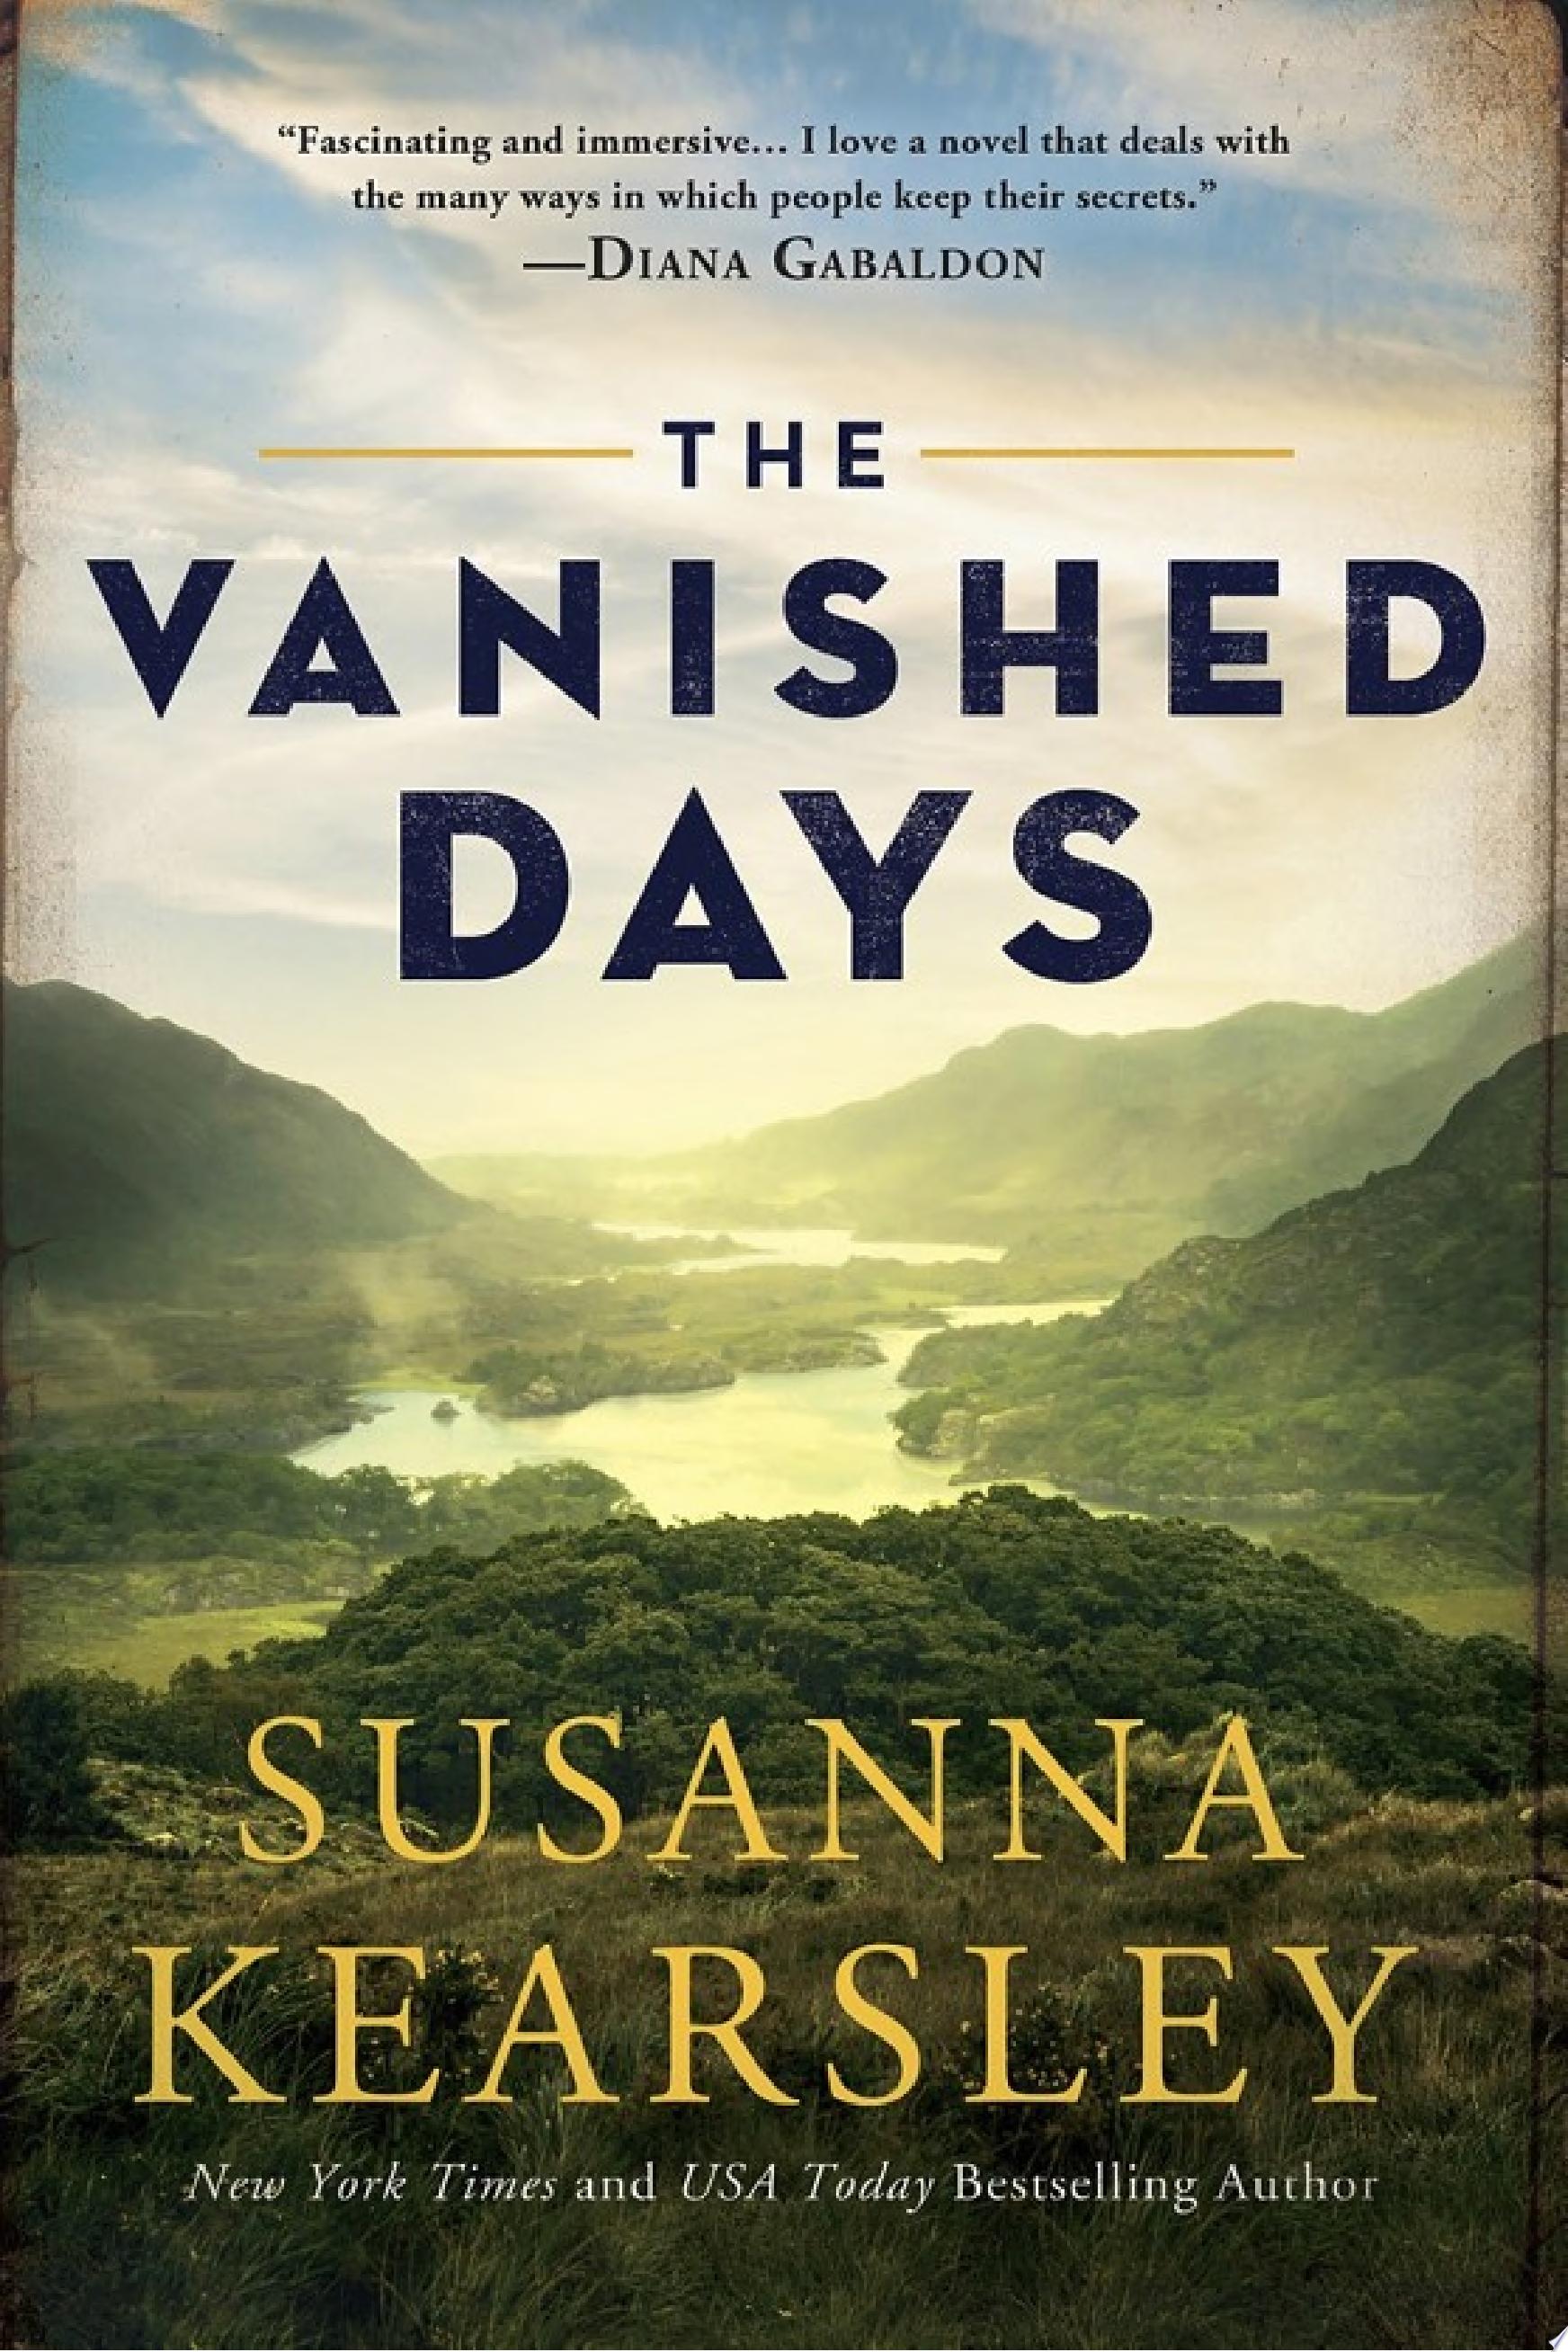 Image for "The Vanished Days"